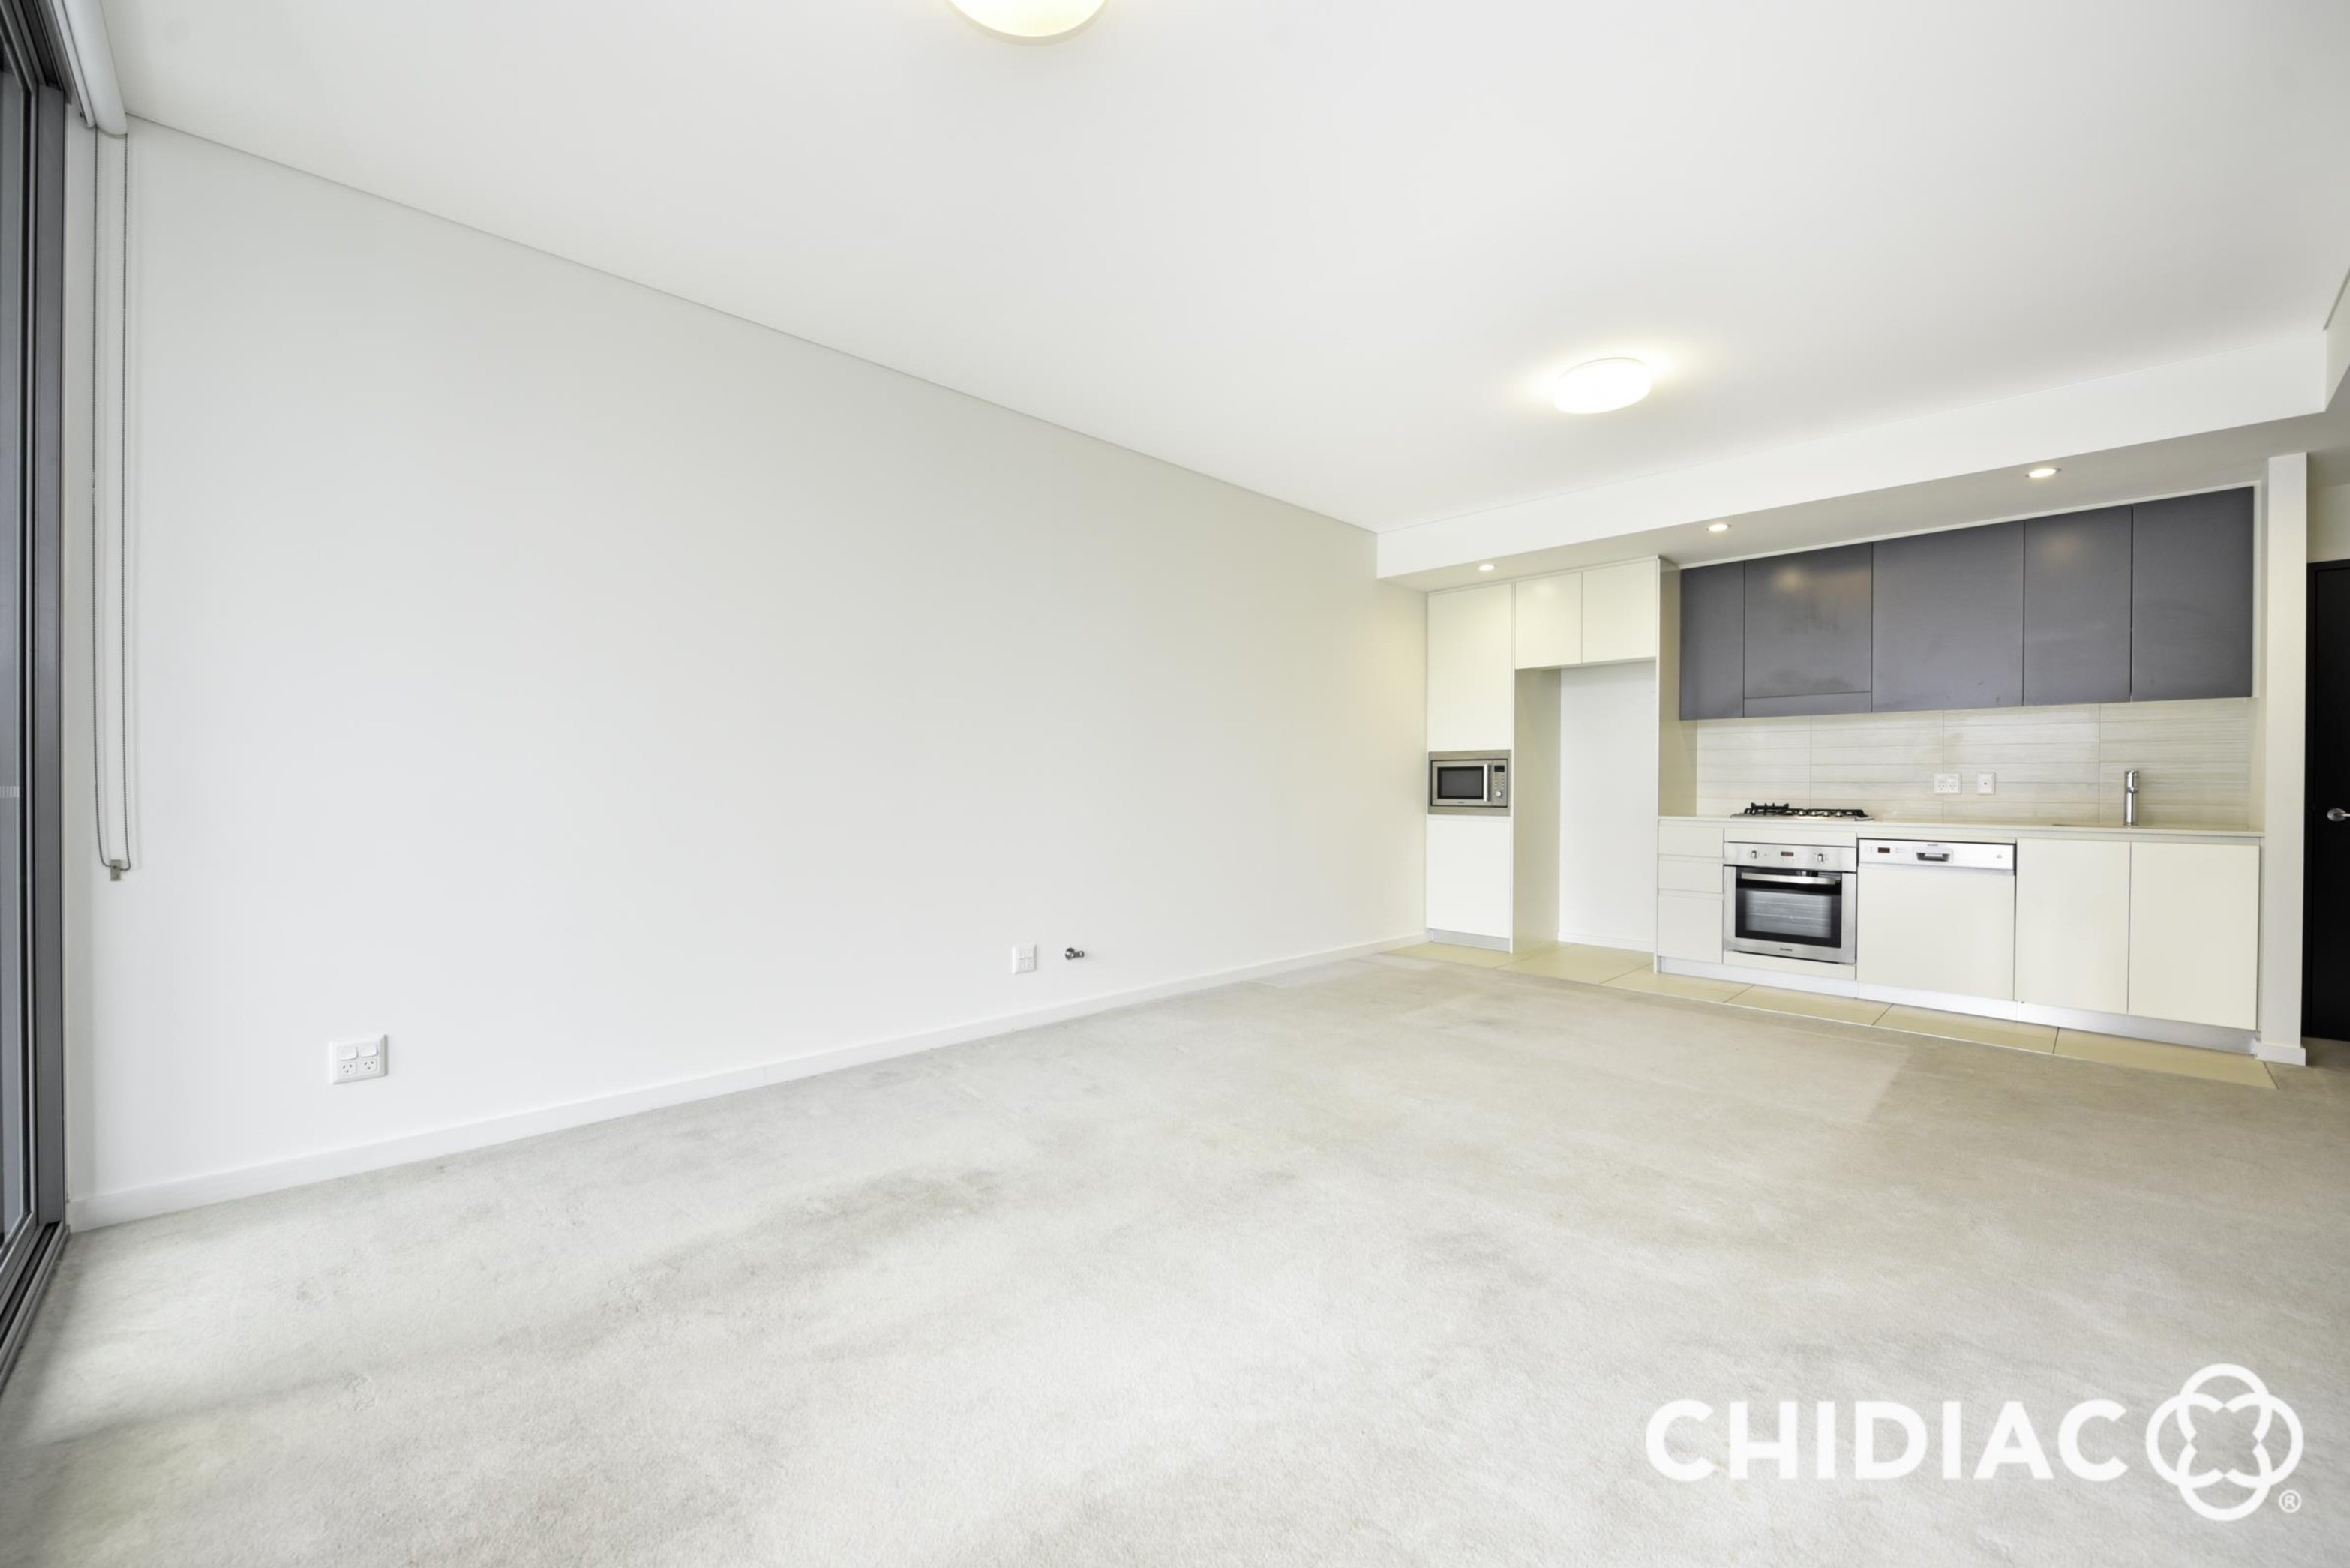 503/8 Nuvolari Place, Wentworth Point Leased by Chidiac Realty - image 2